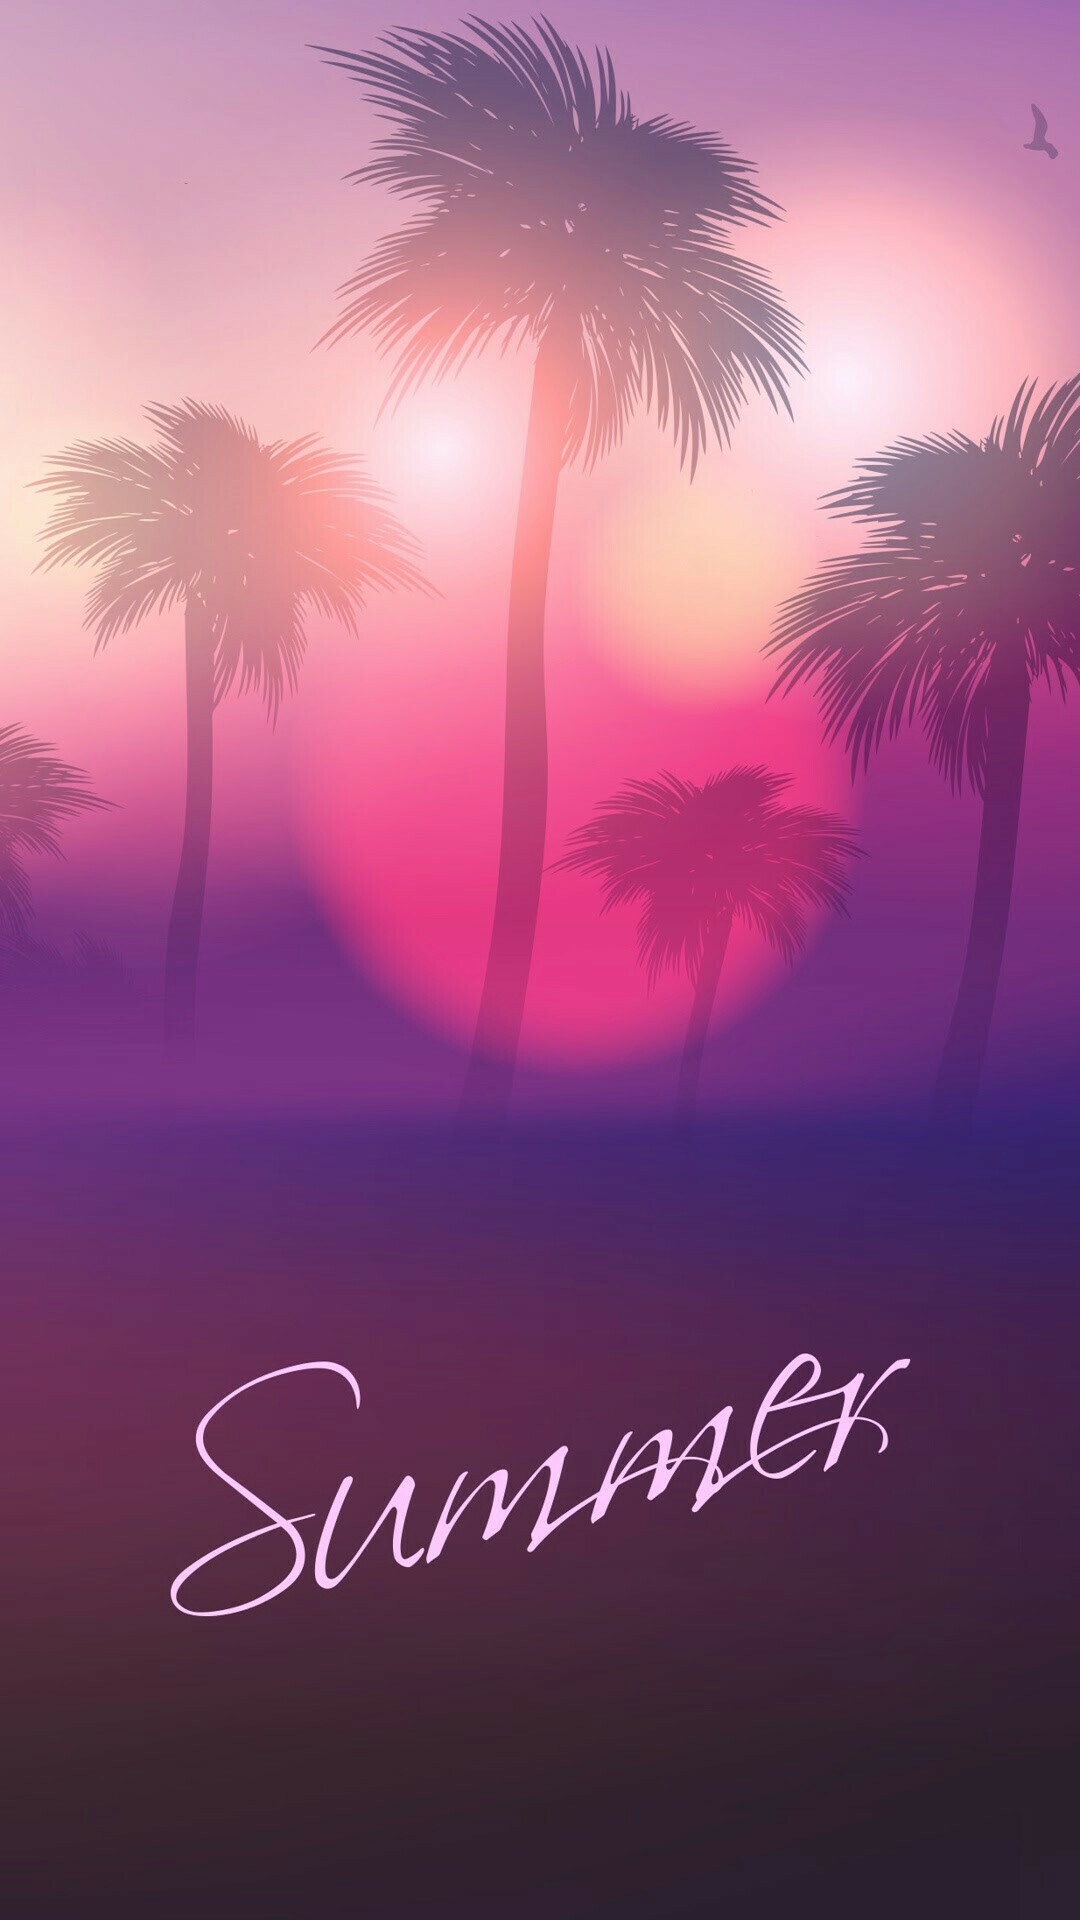 Summer: The hottest season of the year, Characterized by bright, sunny, hot days and later sunsets. 1080x1920 Full HD Wallpaper.